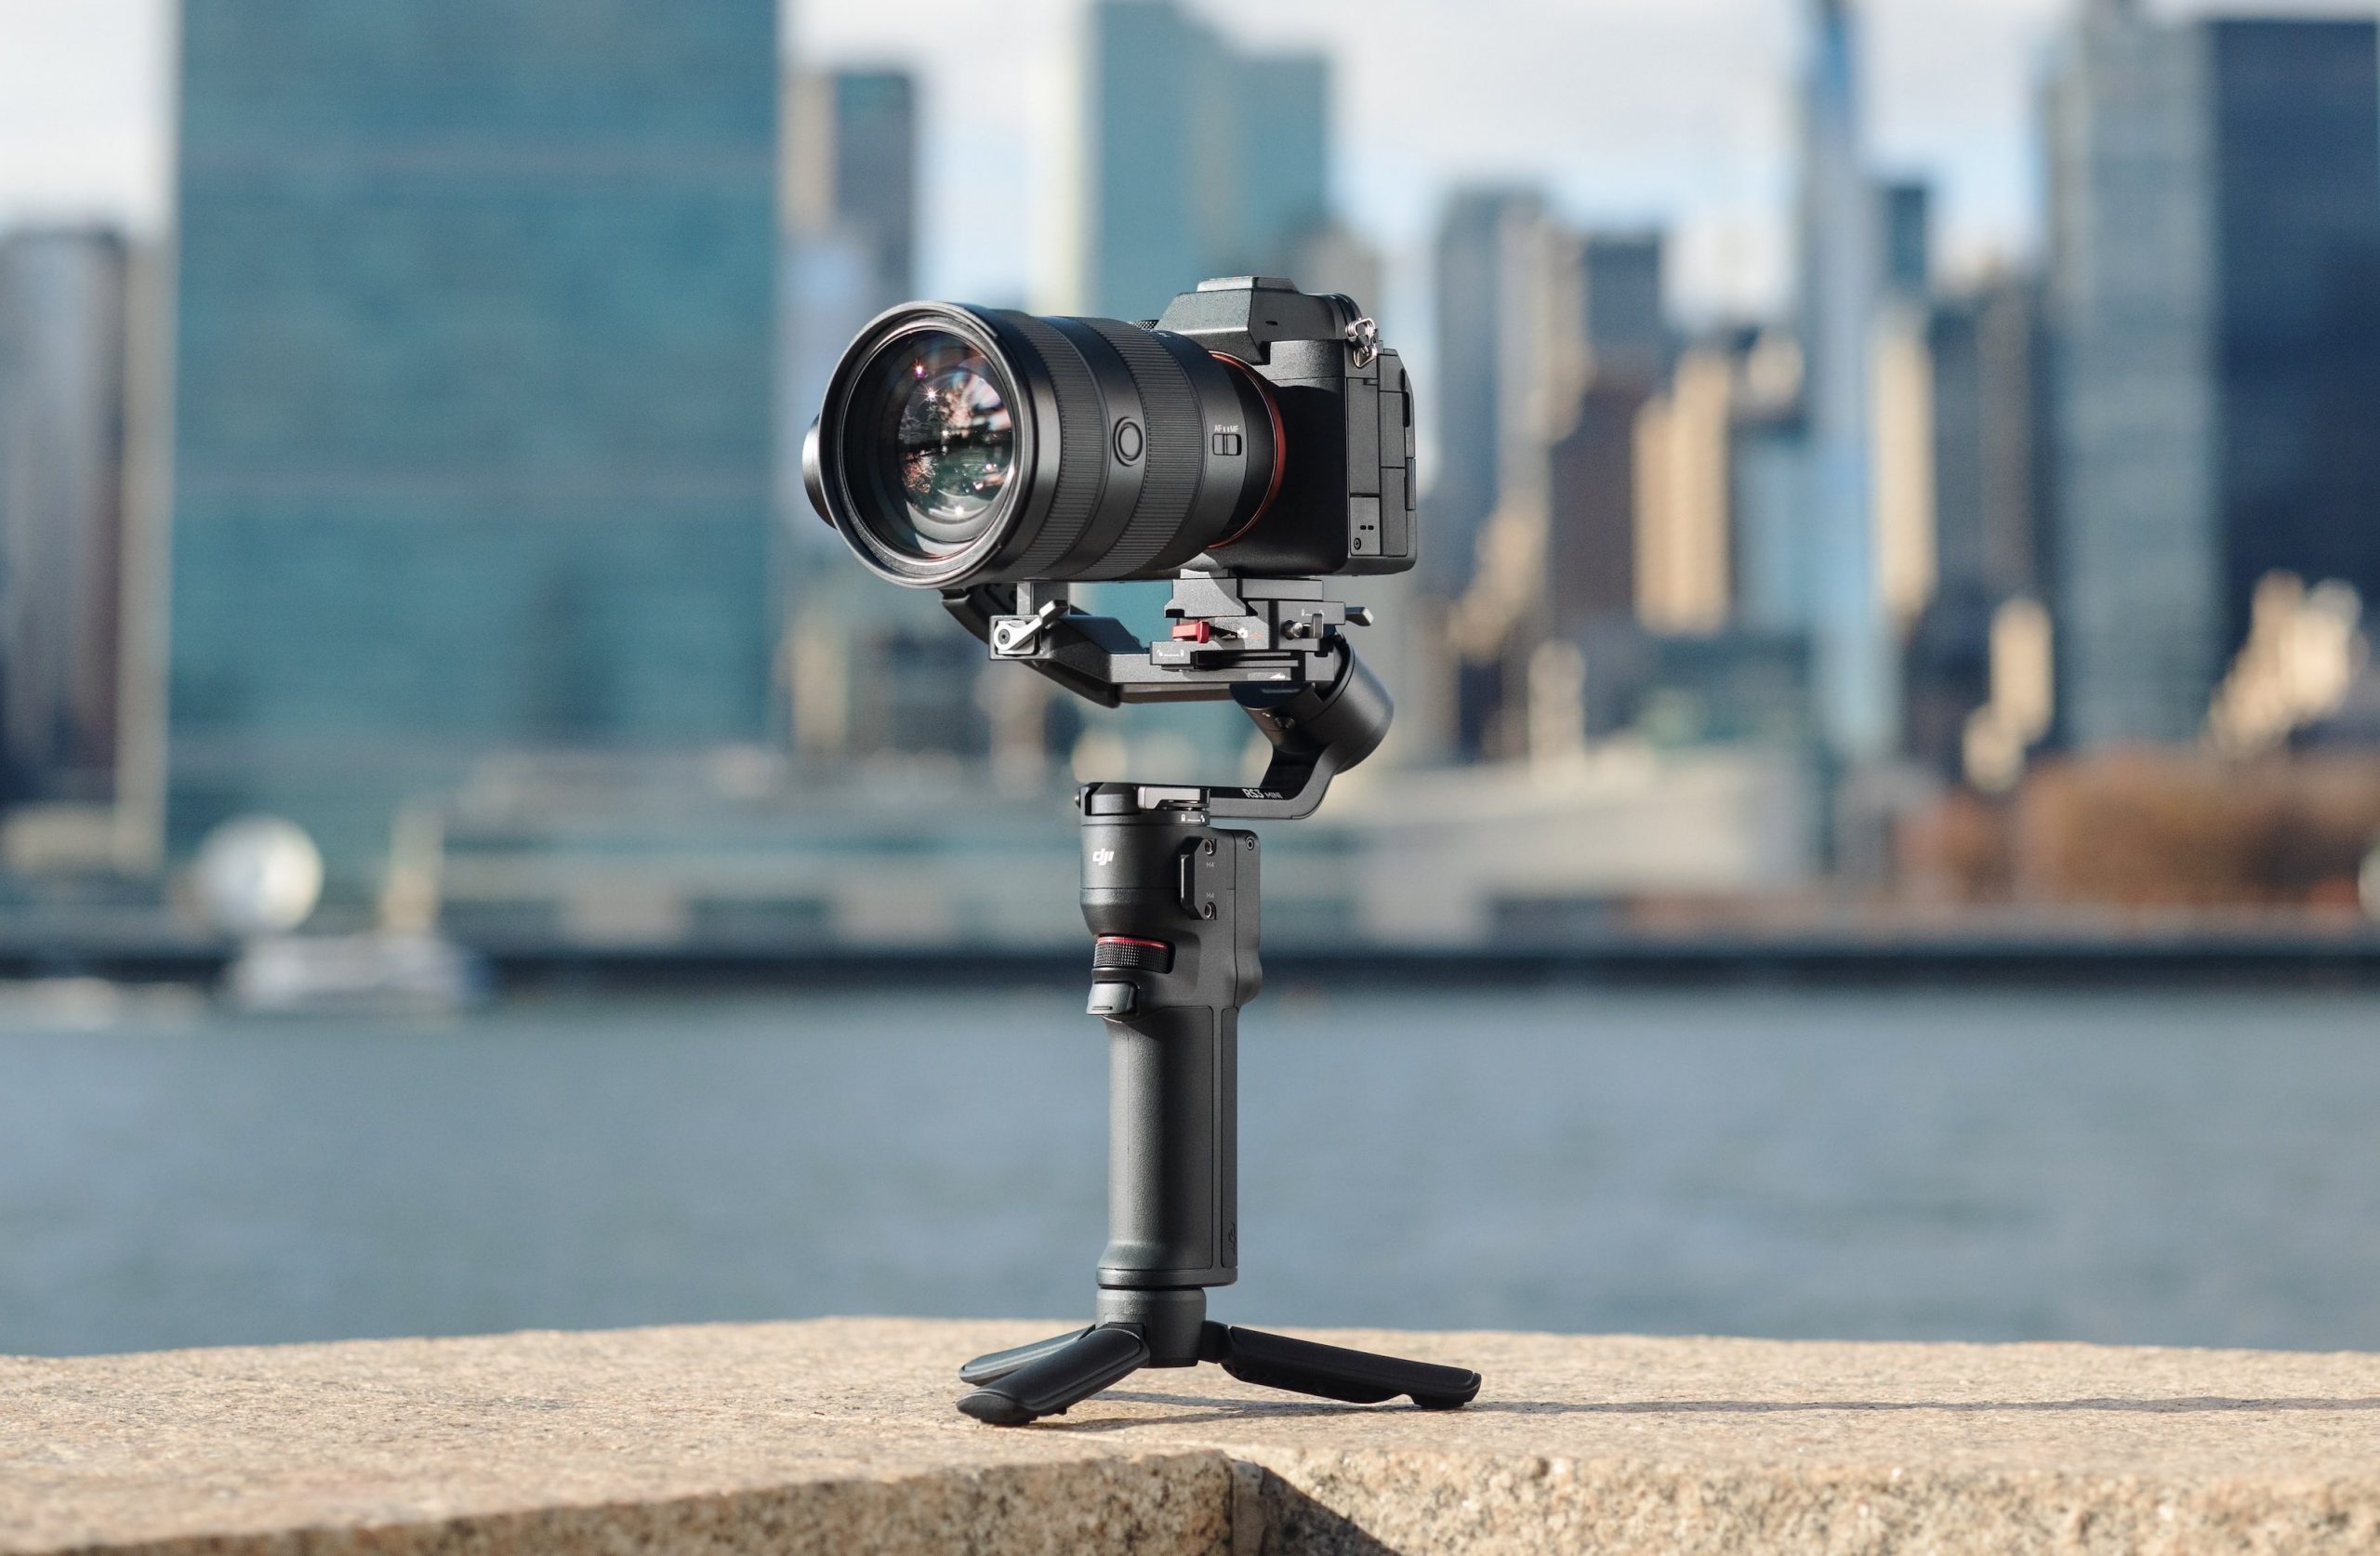 The RS 3 Mini First Look  DJI's Smallest Camera Gimbal - Moment